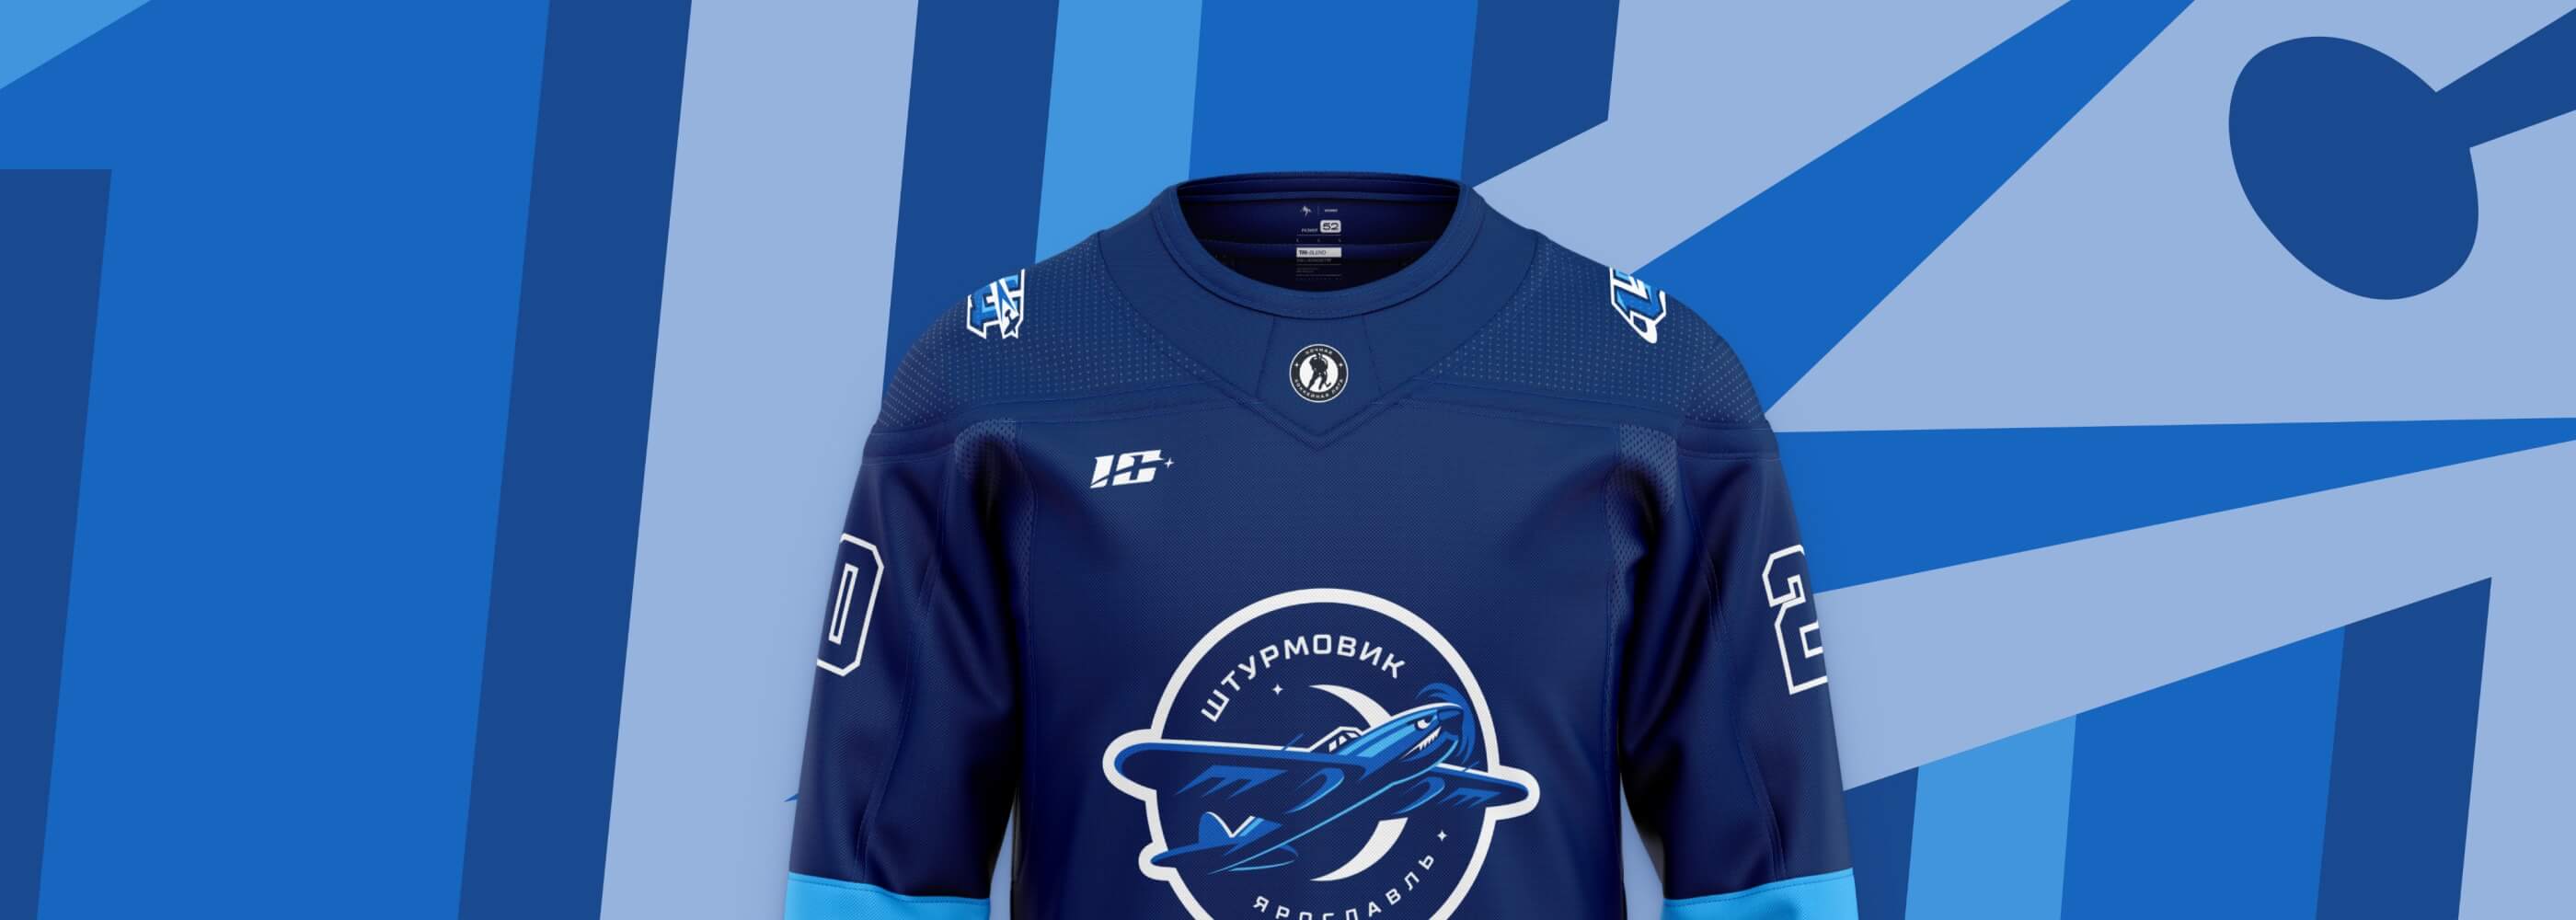 15th annivessary Home Jersey set for amateur Ice Hockey team